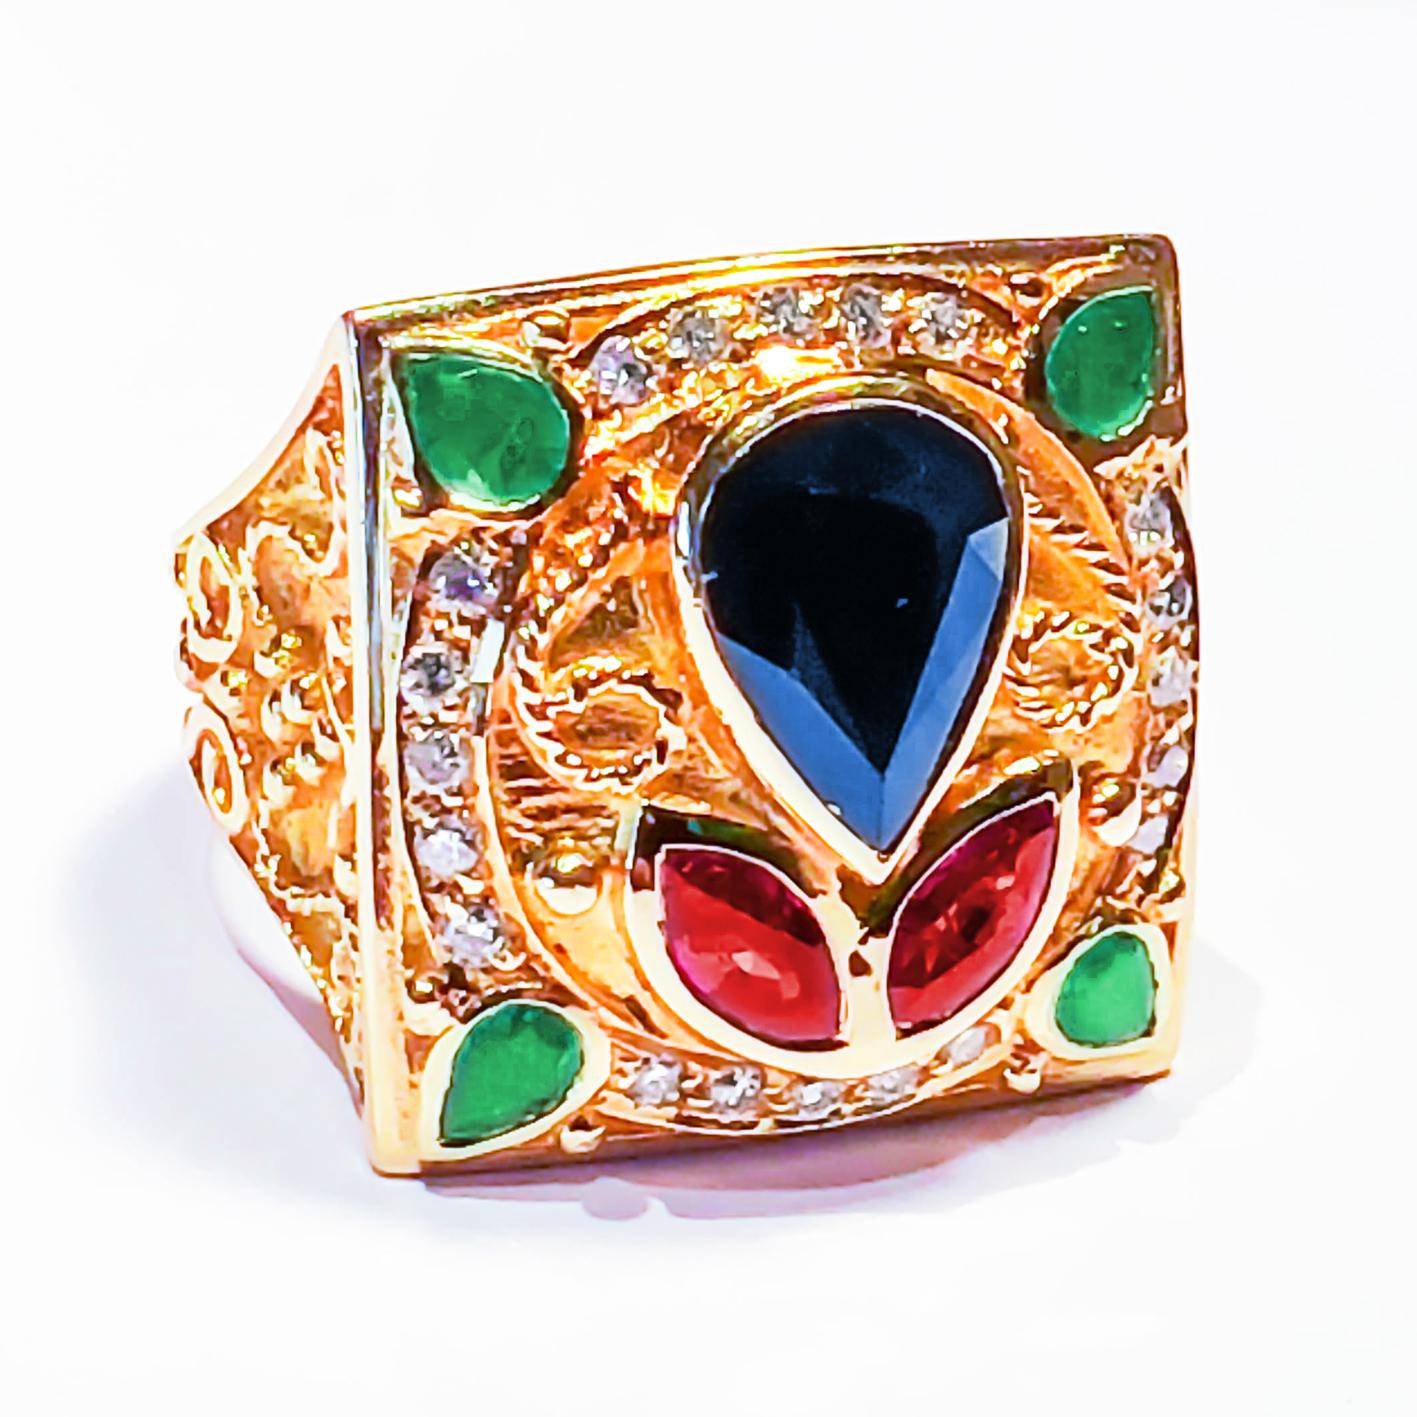 Women's Georgios Collections 18 Karat Yellow Gold Sapphire Ring with Emeralds and Rubies